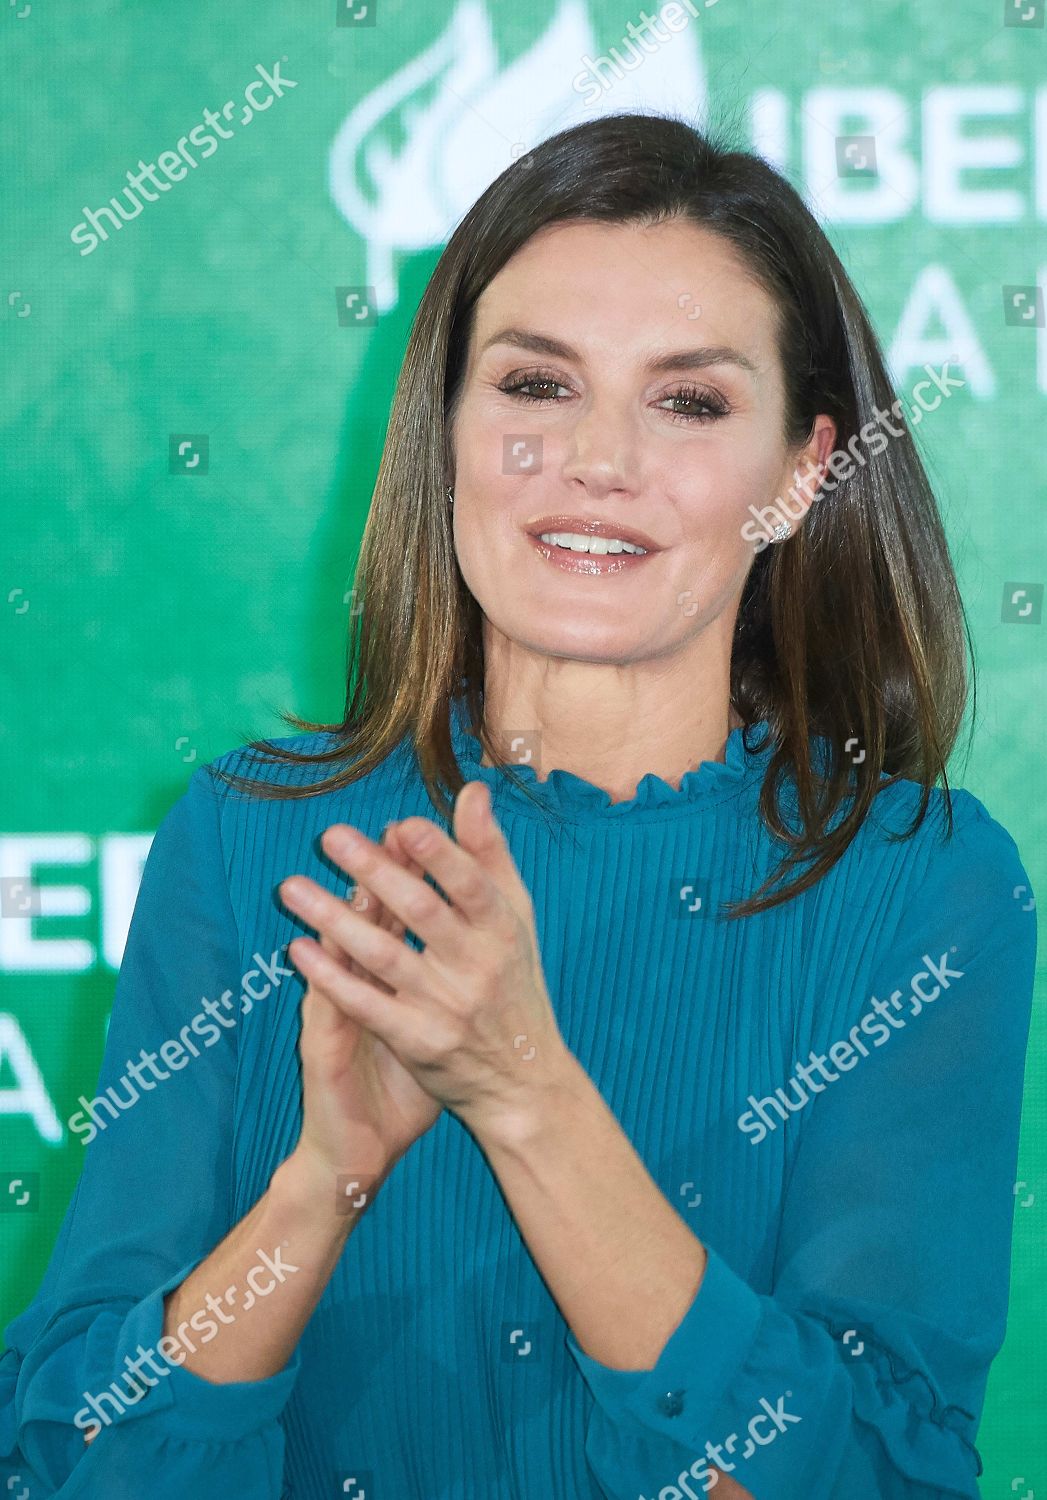 delivery-of-the-grants-for-masters-and-research-aid-of-the-fundacion-iberdrola-madrid-spain-shutterstock-editorial-10079598u.jpg